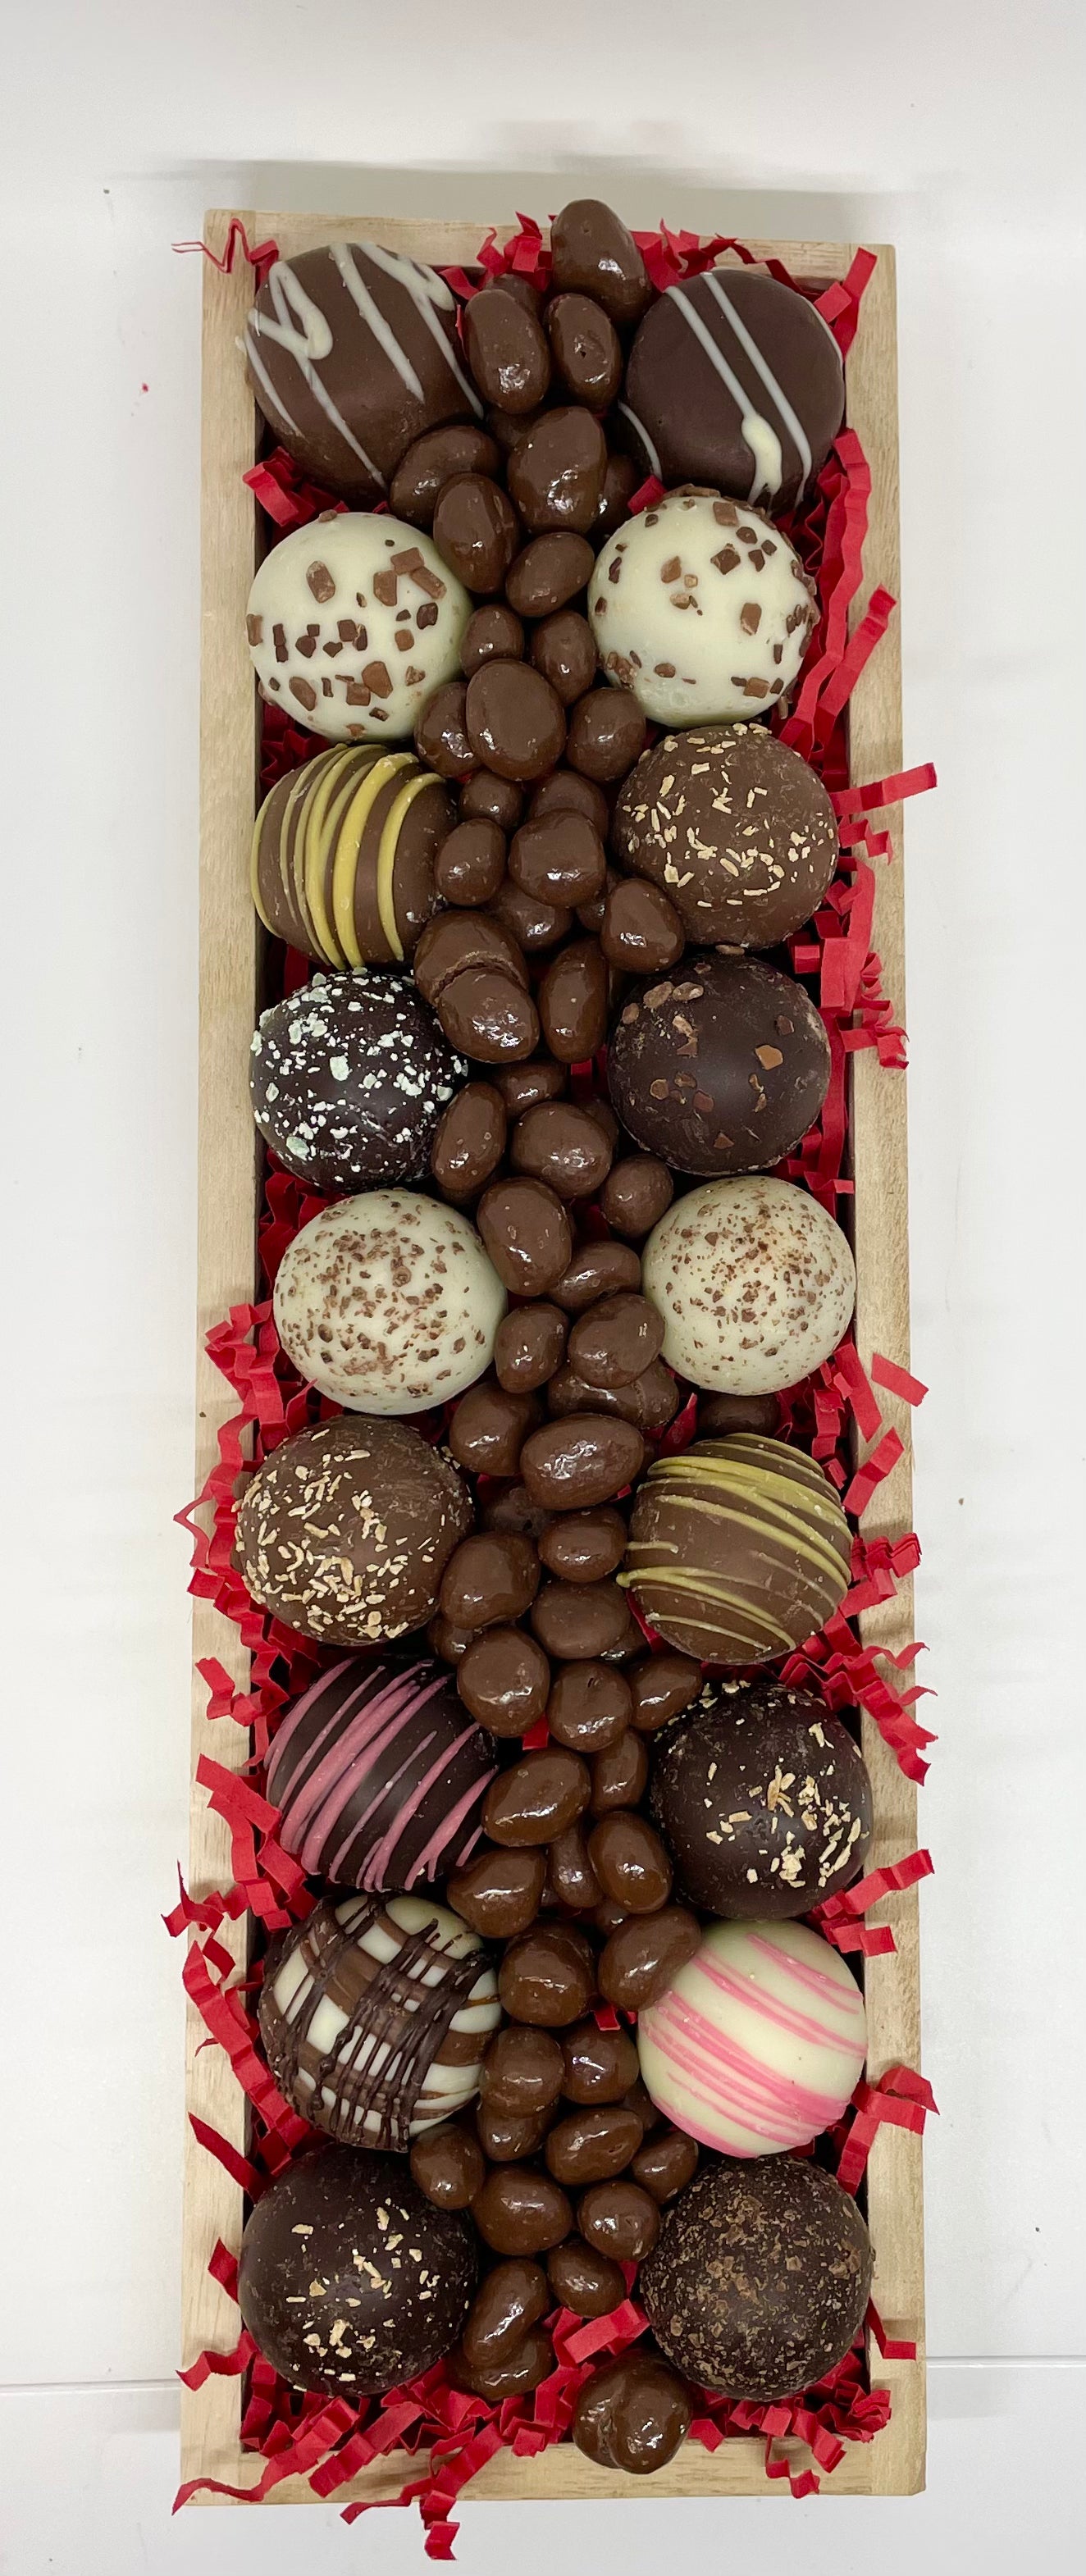 Truffle TrayGourmet Chocolate TrayA nice gift presentation of handmade chocolate clusters and barks. Affordable as a gift for virtually any occasion. Ribbon color and chocolates vary per season.
Same